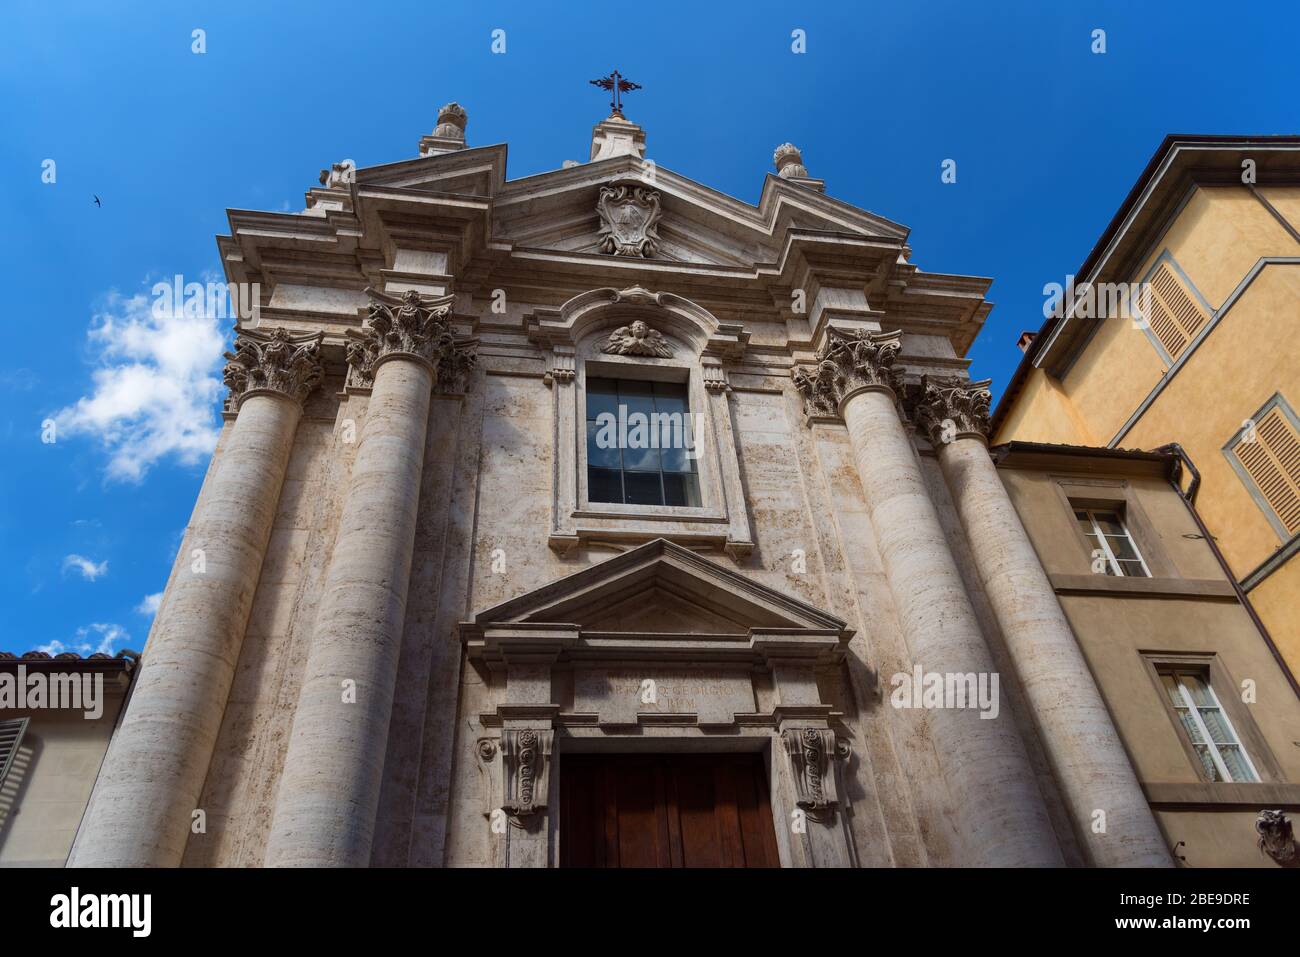 Architectural exterior of church in Siena, Italy Stock Photo